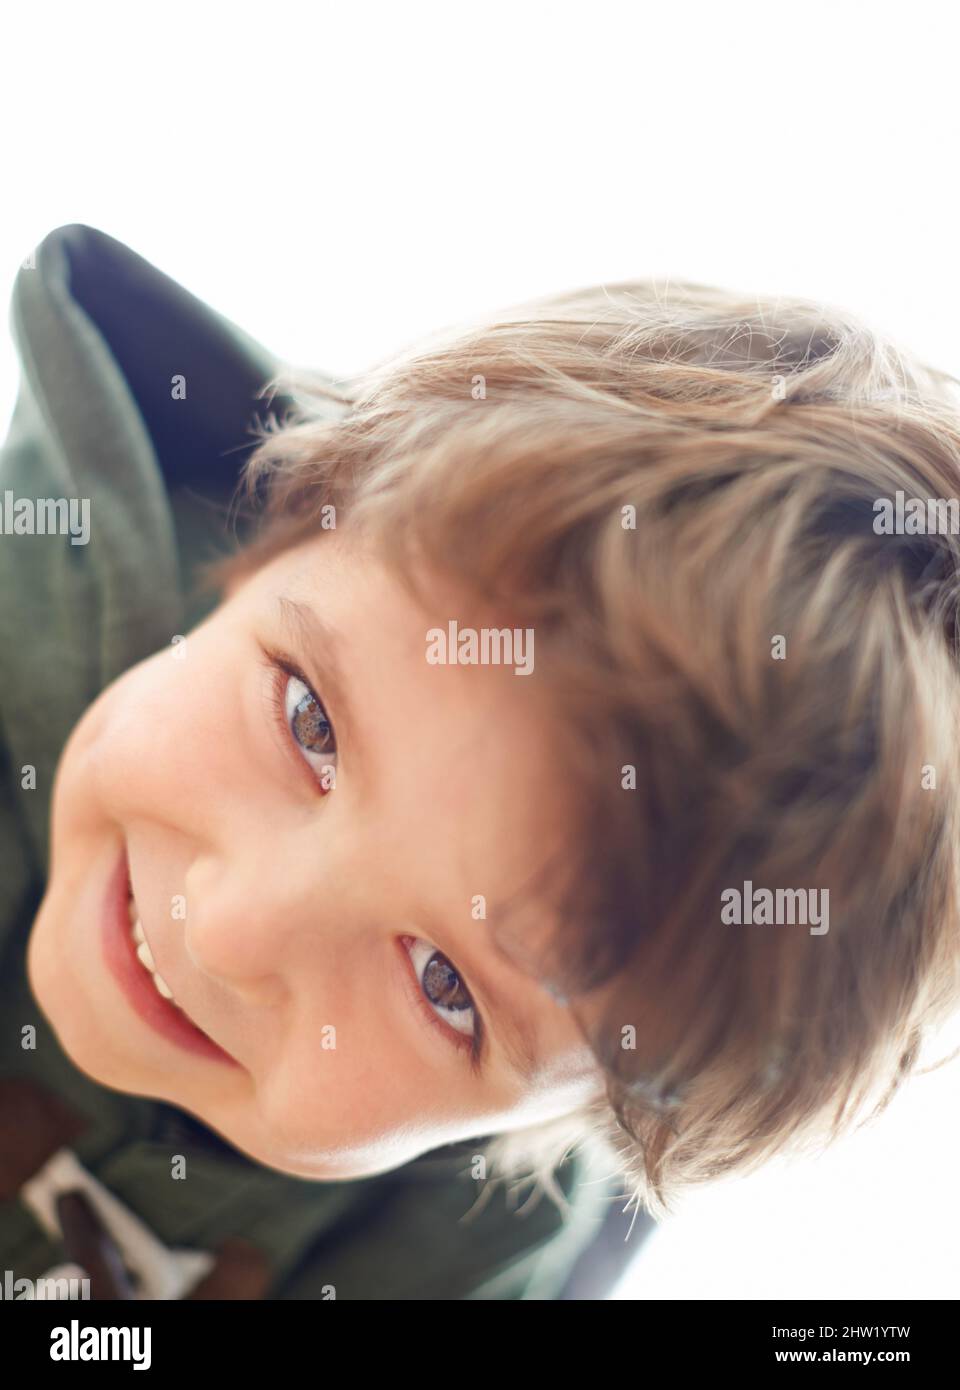 Up to some mischief.... A young boy leaning over to look at the camera. Stock Photo